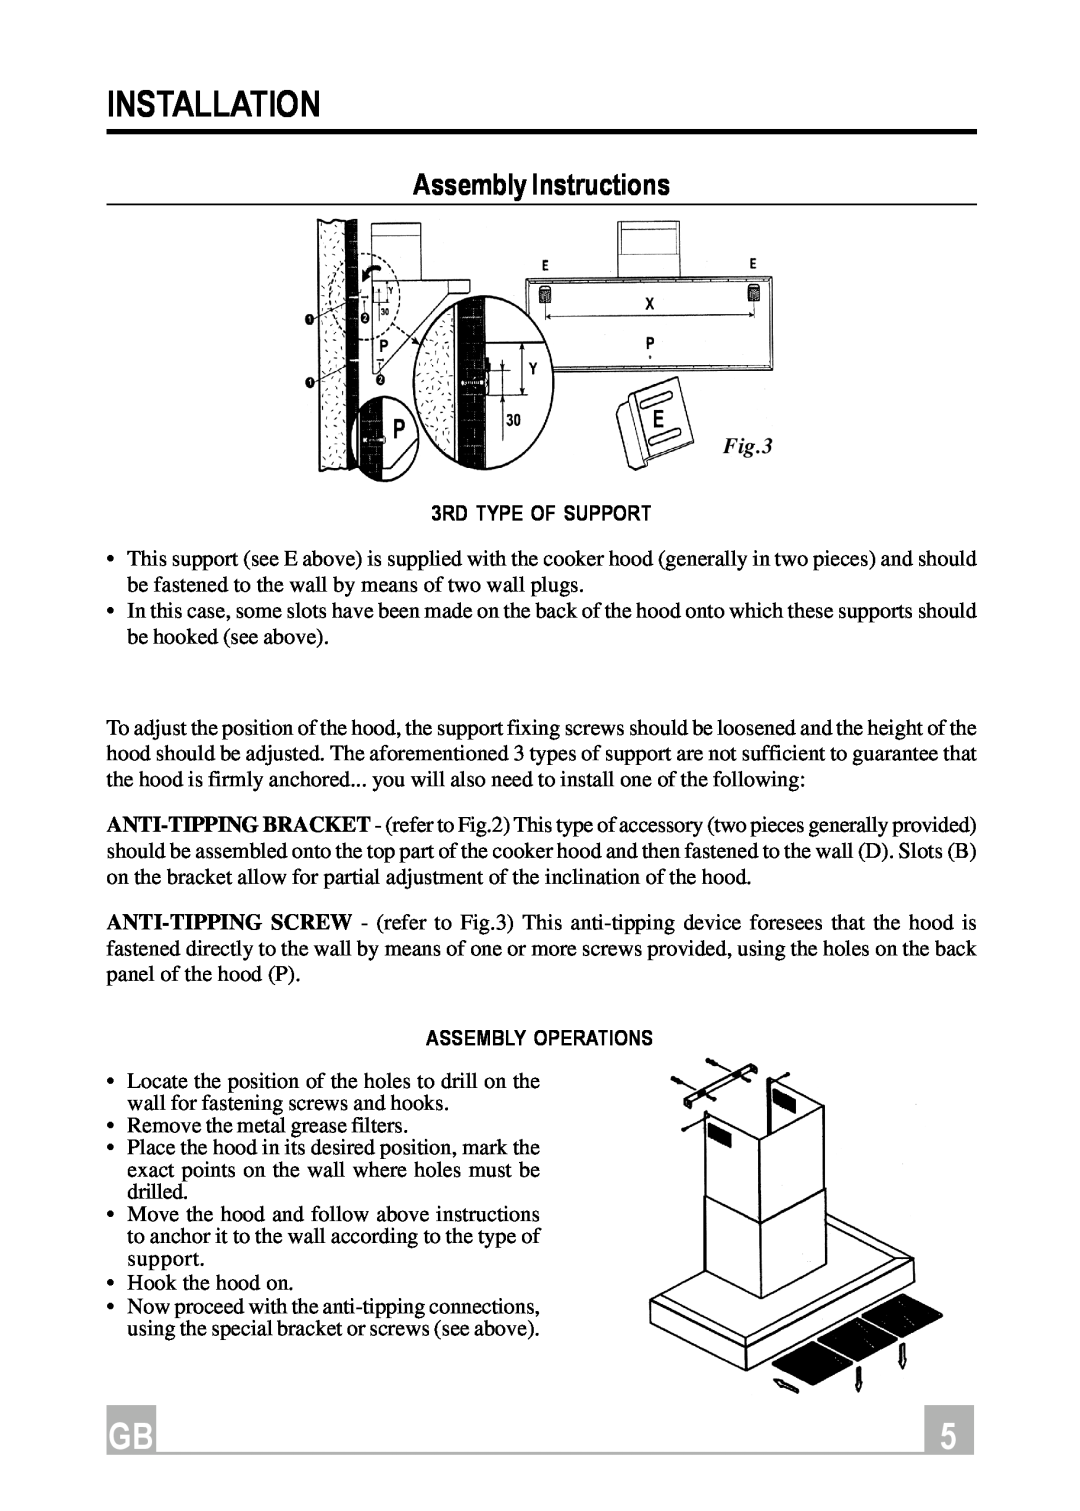 Hotpoint HX901X manual 3RD TYPE OF SUPPORT, Assembly Operations, Installation, Assembly Instructions 